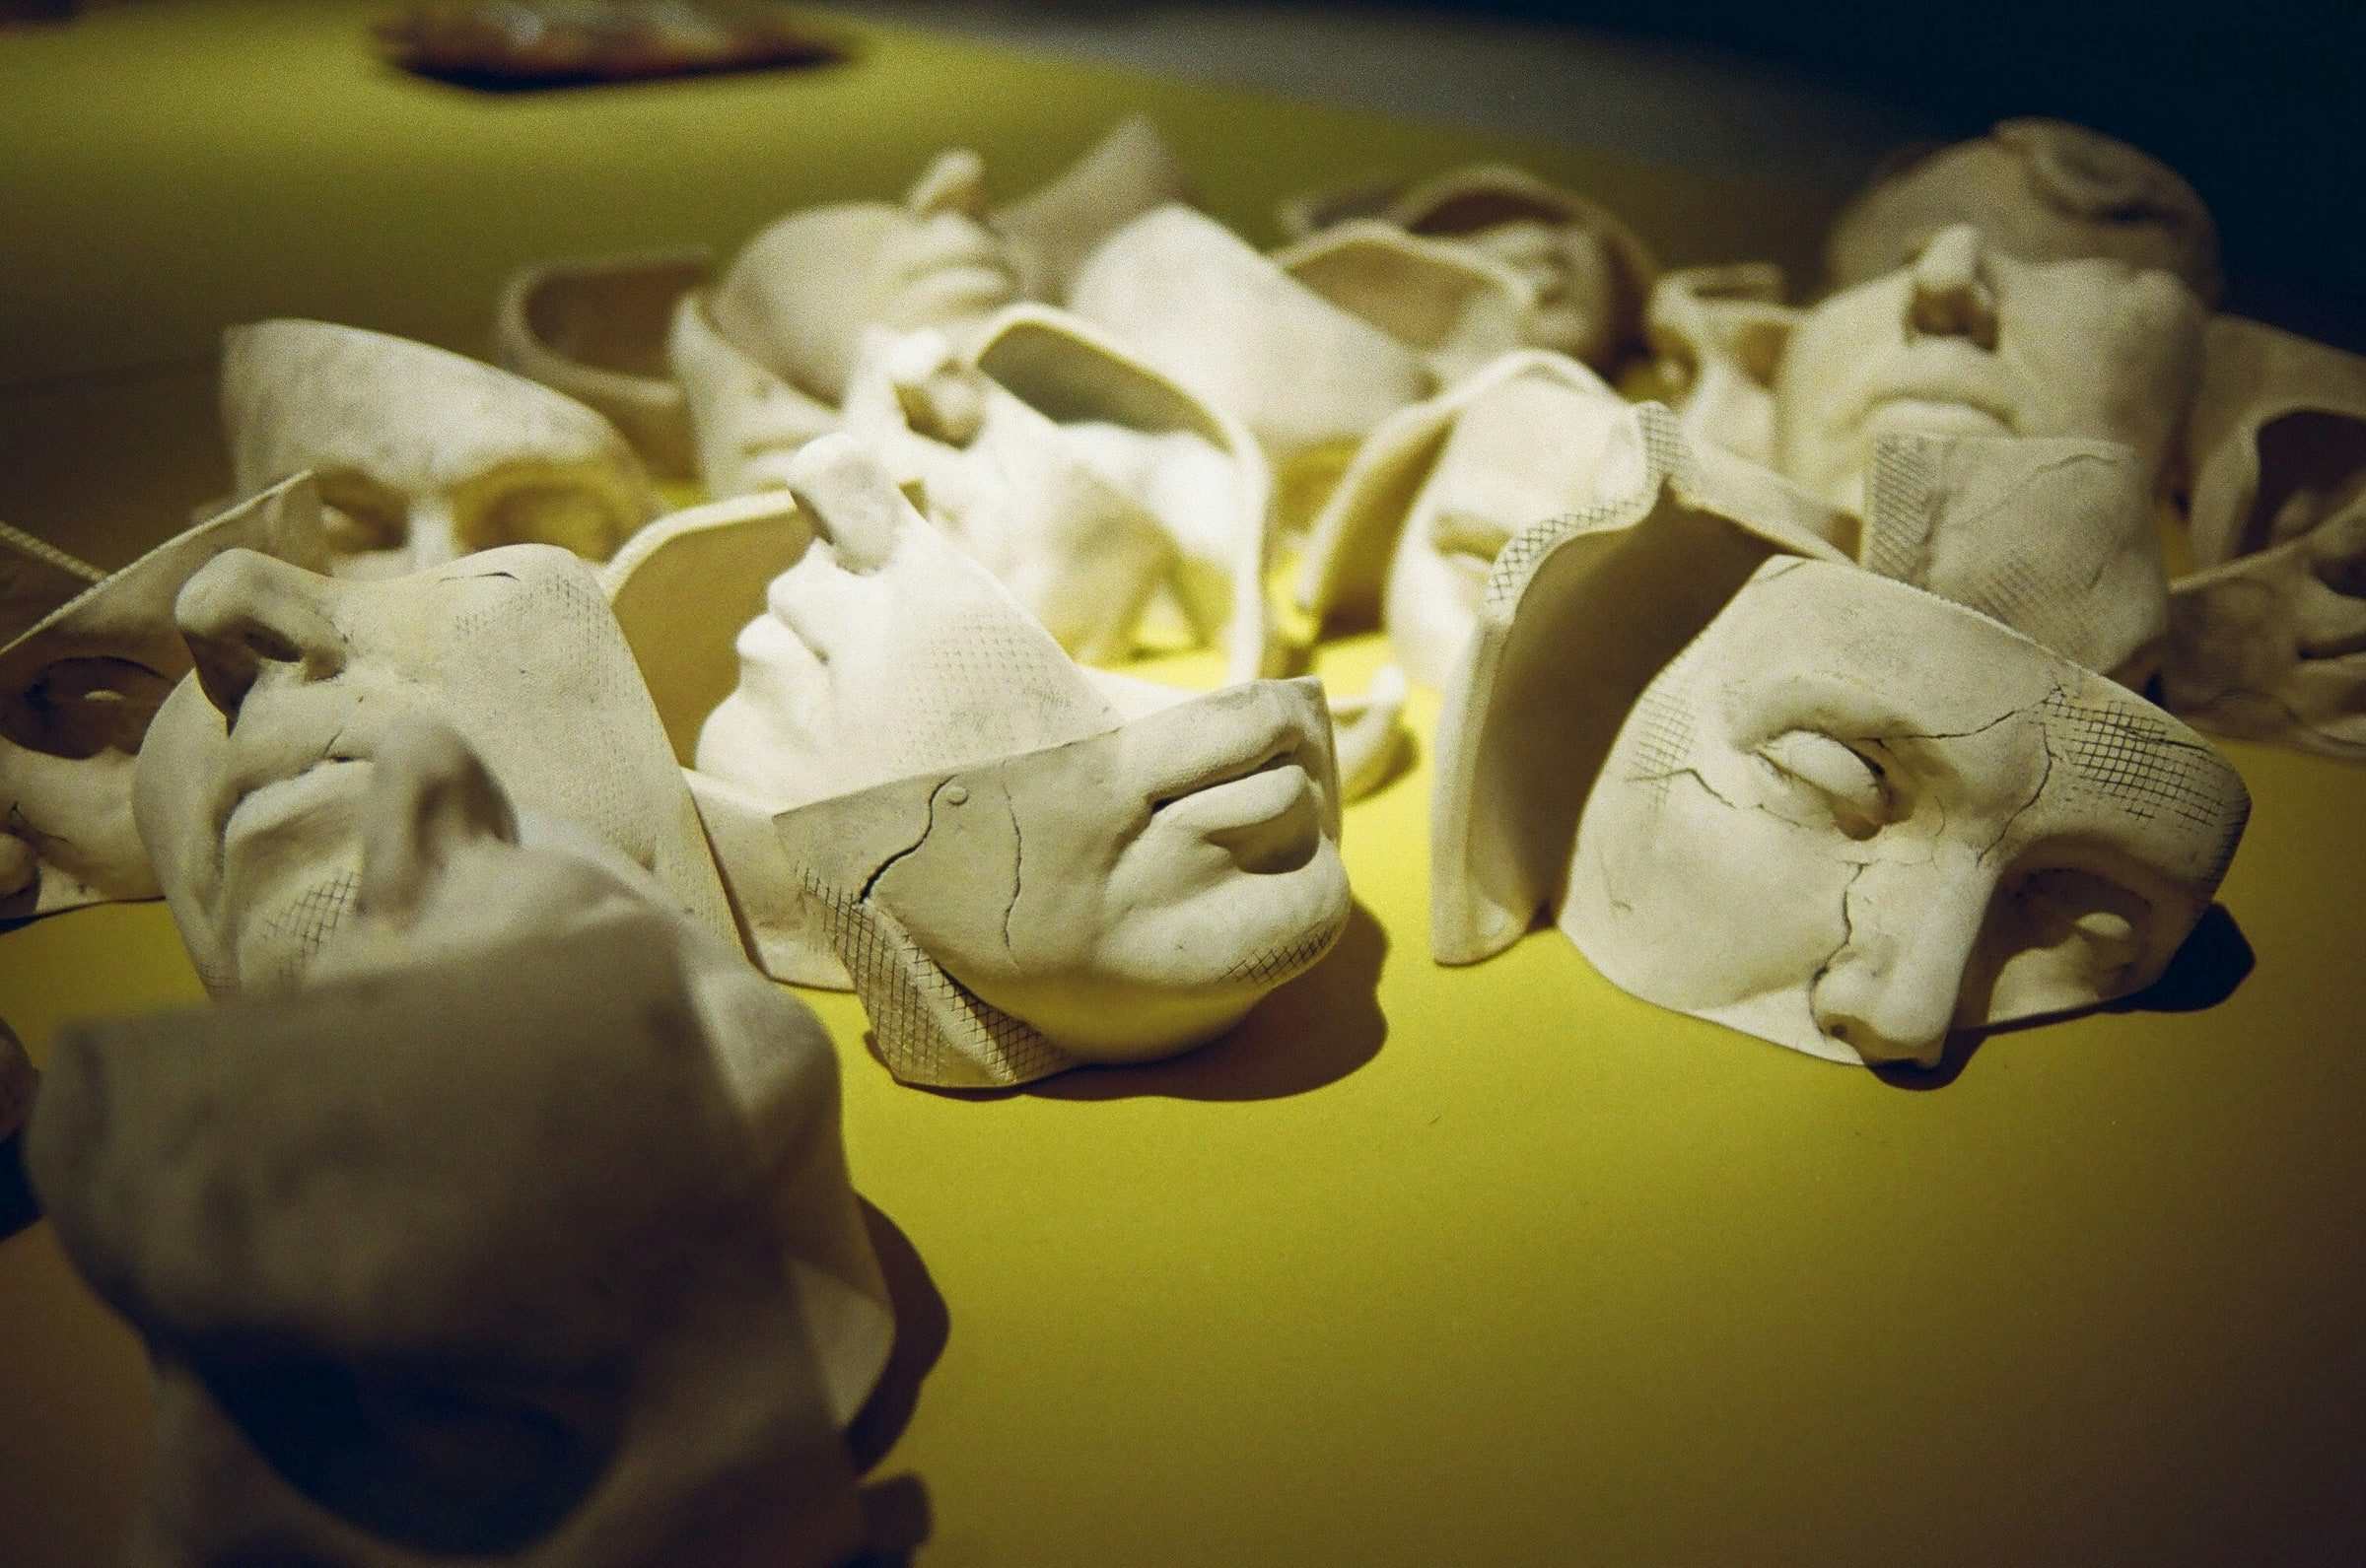 Partial masks in a pile